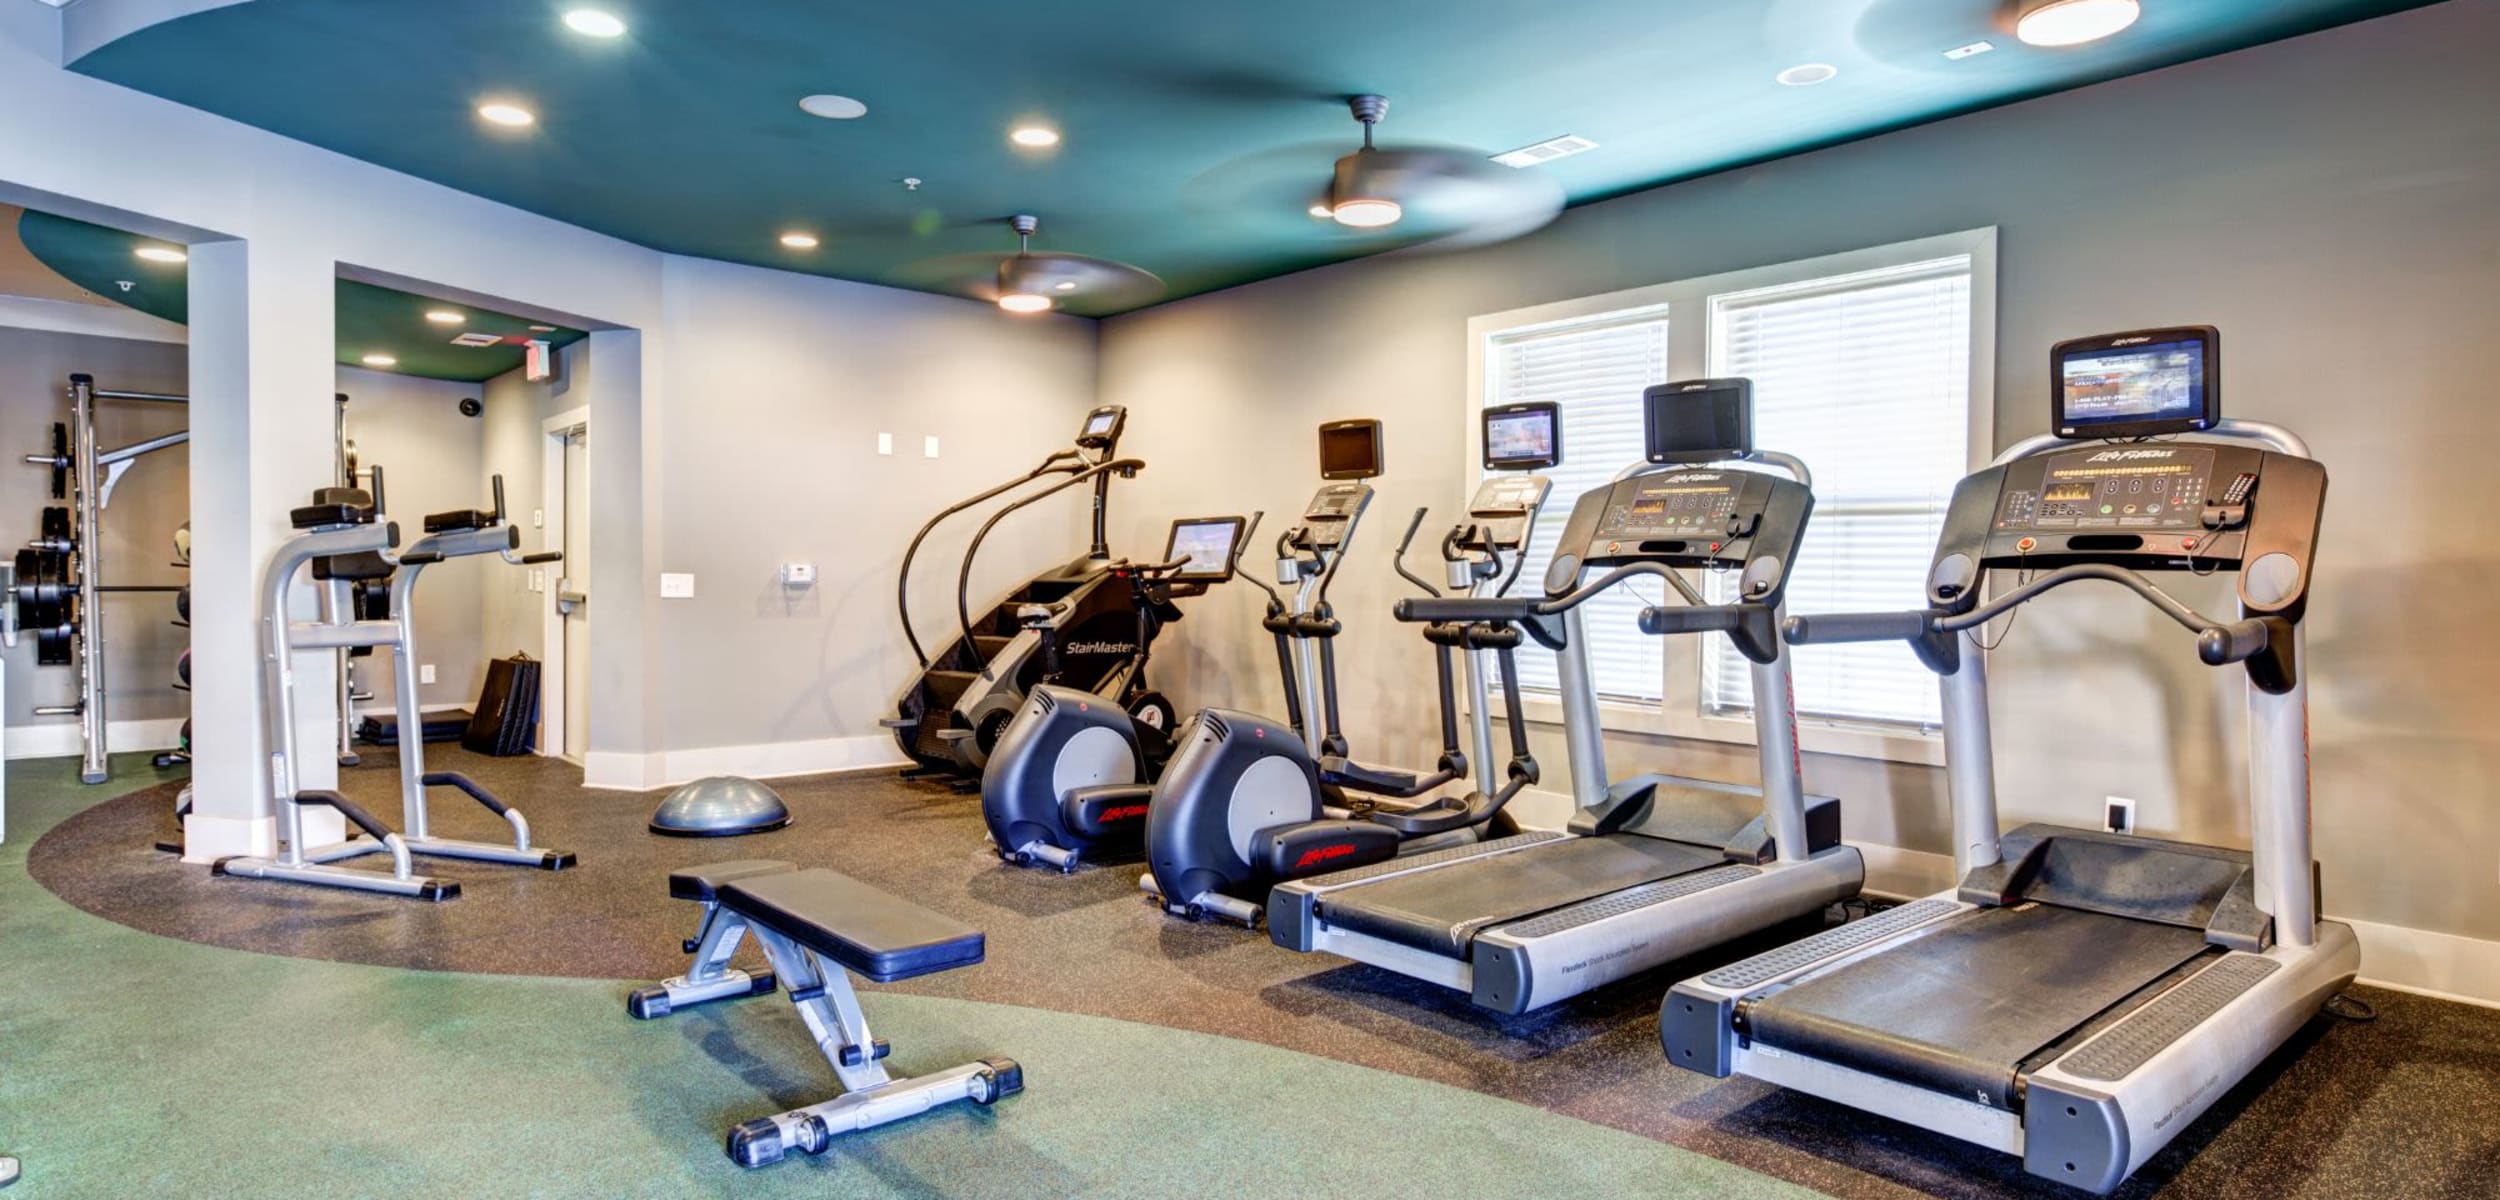 Fitness center at Marquis at Morrison Plantation in Mooresville, North Carolina